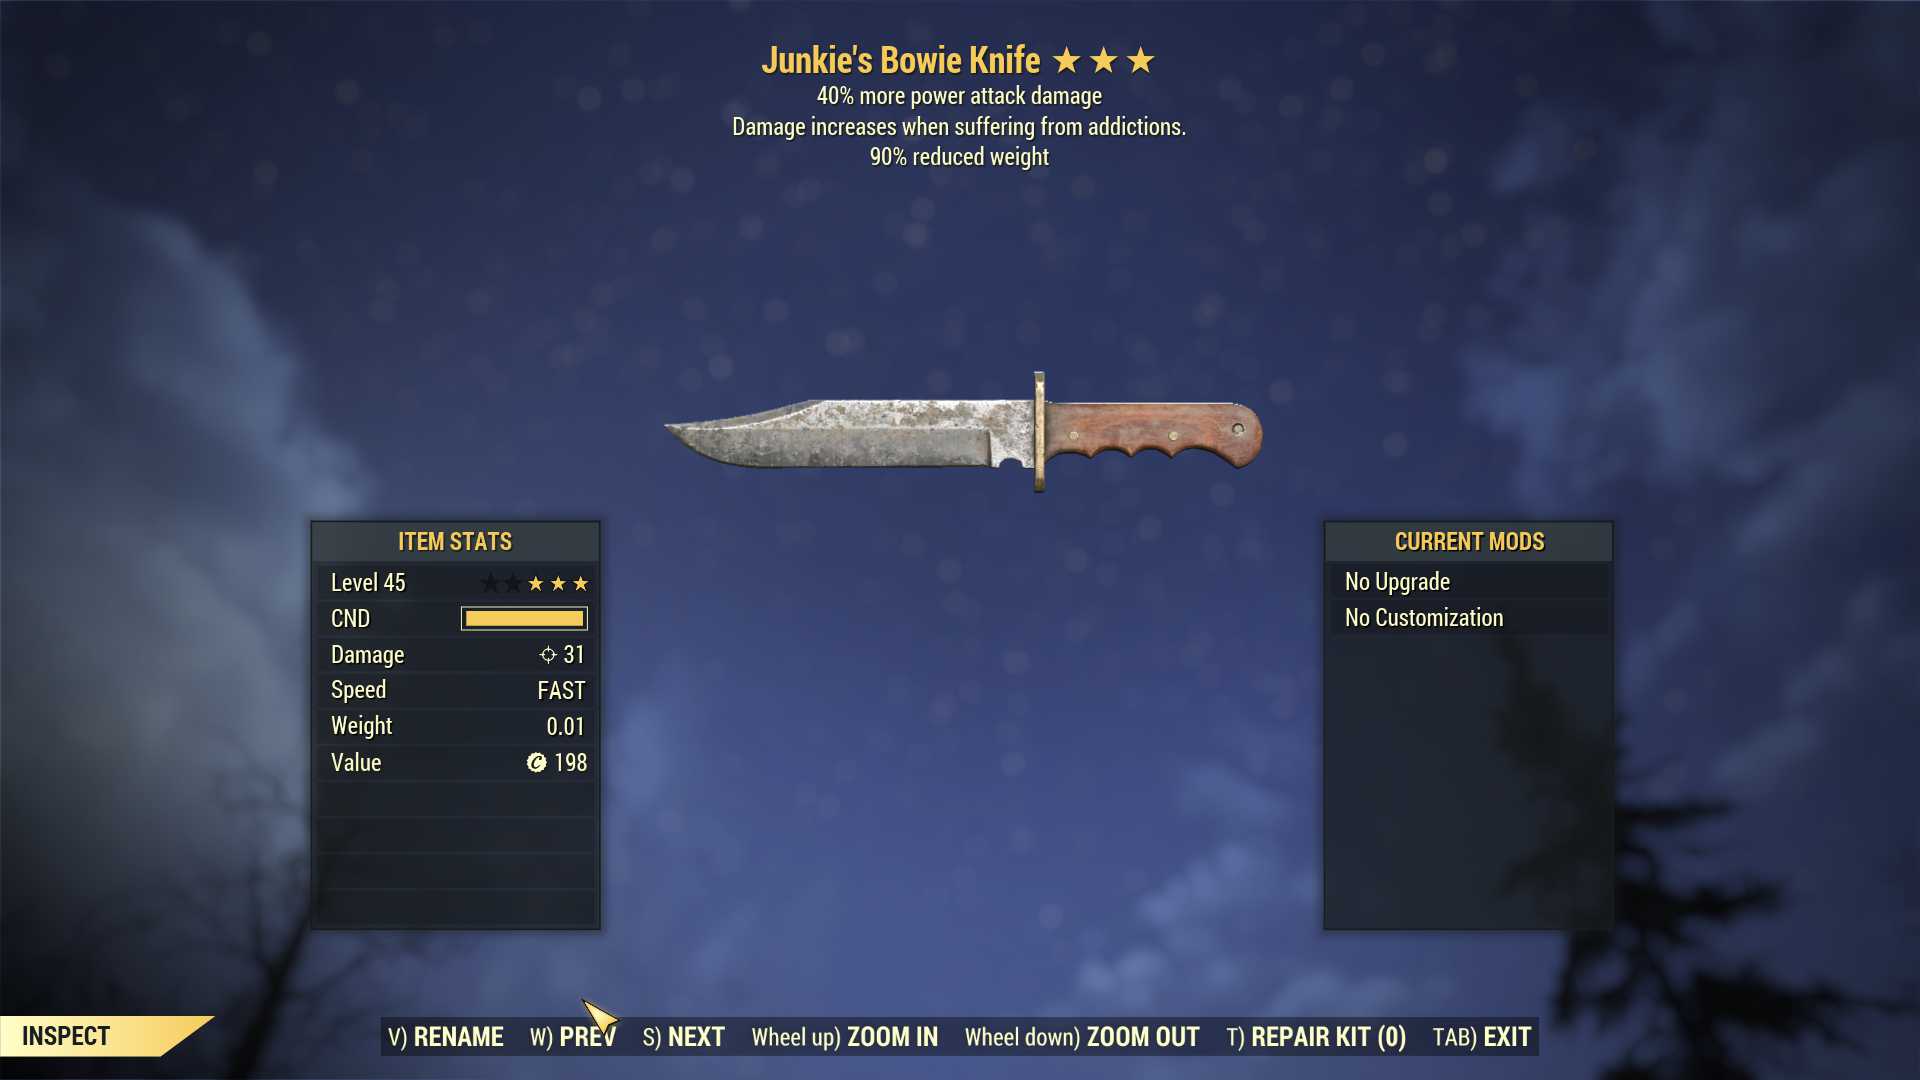 Junkie's Bowie Knife (+40% damage PA, 90% reduced weight)